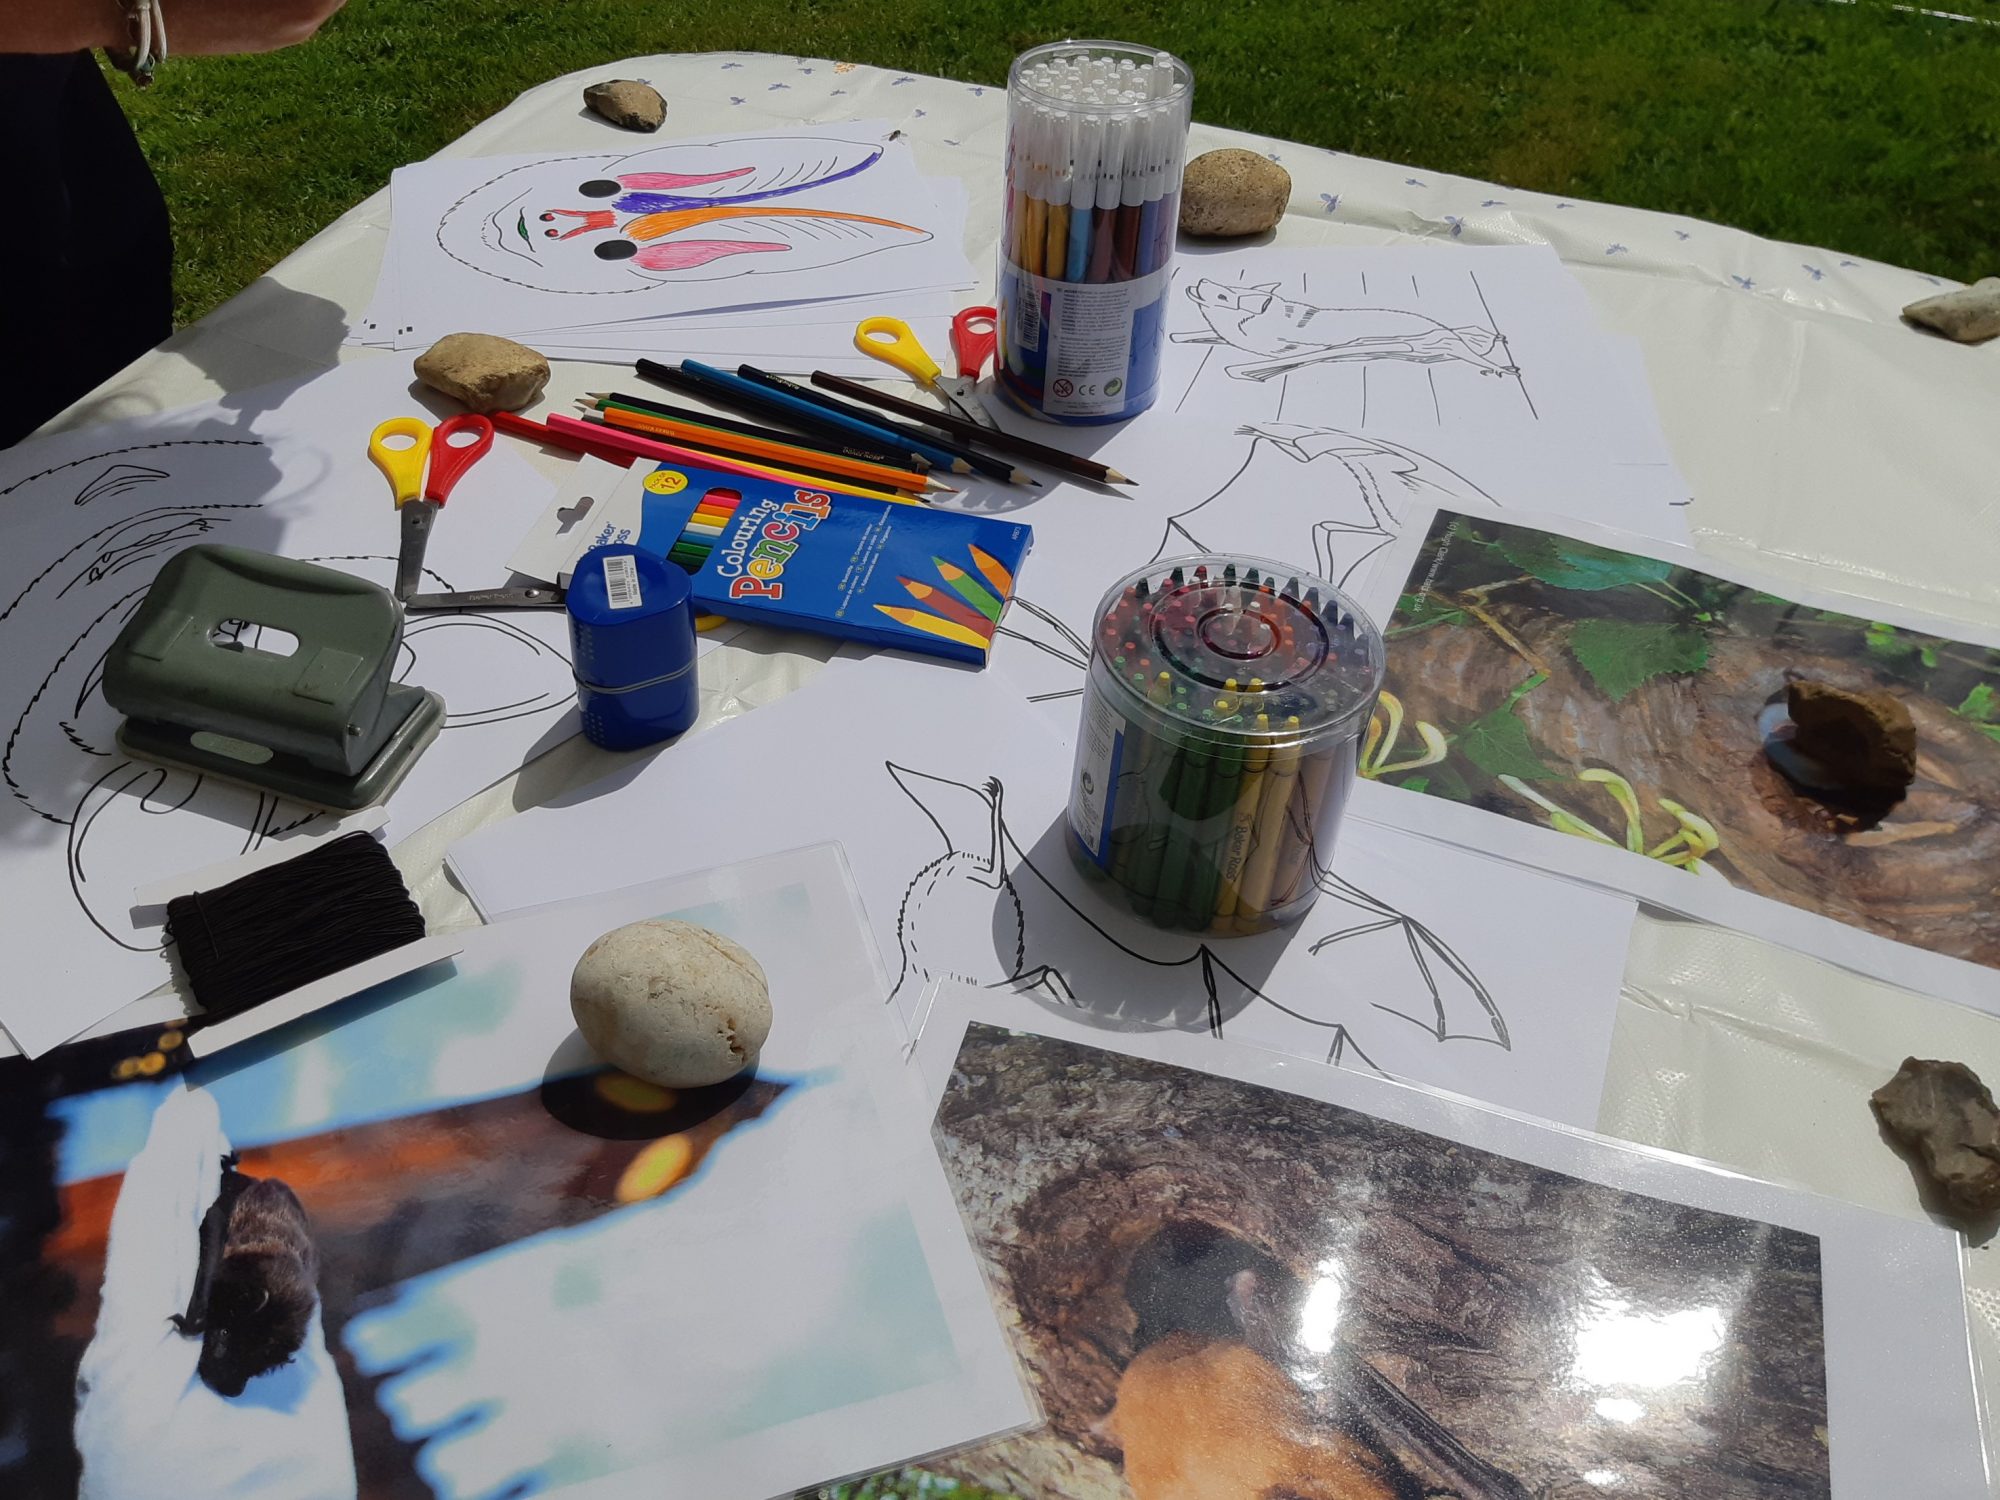 A table with activities for children at a church fete